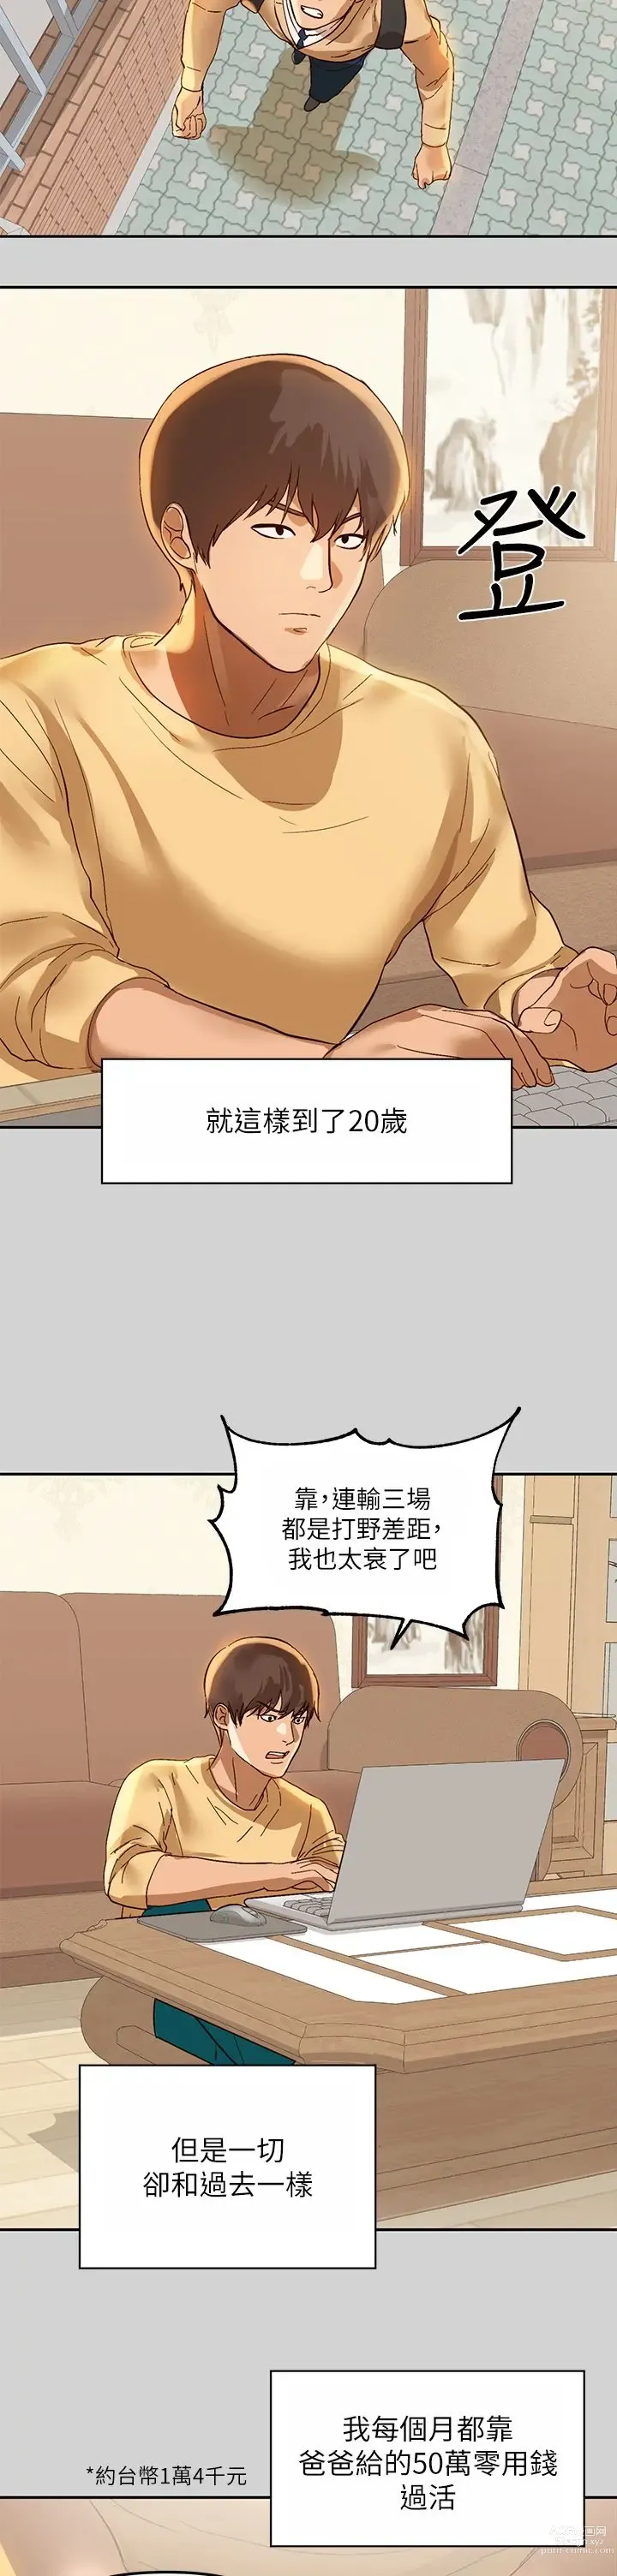 Page 10 of manga 富家女姐姐/ The Owner Of A Building 1-50